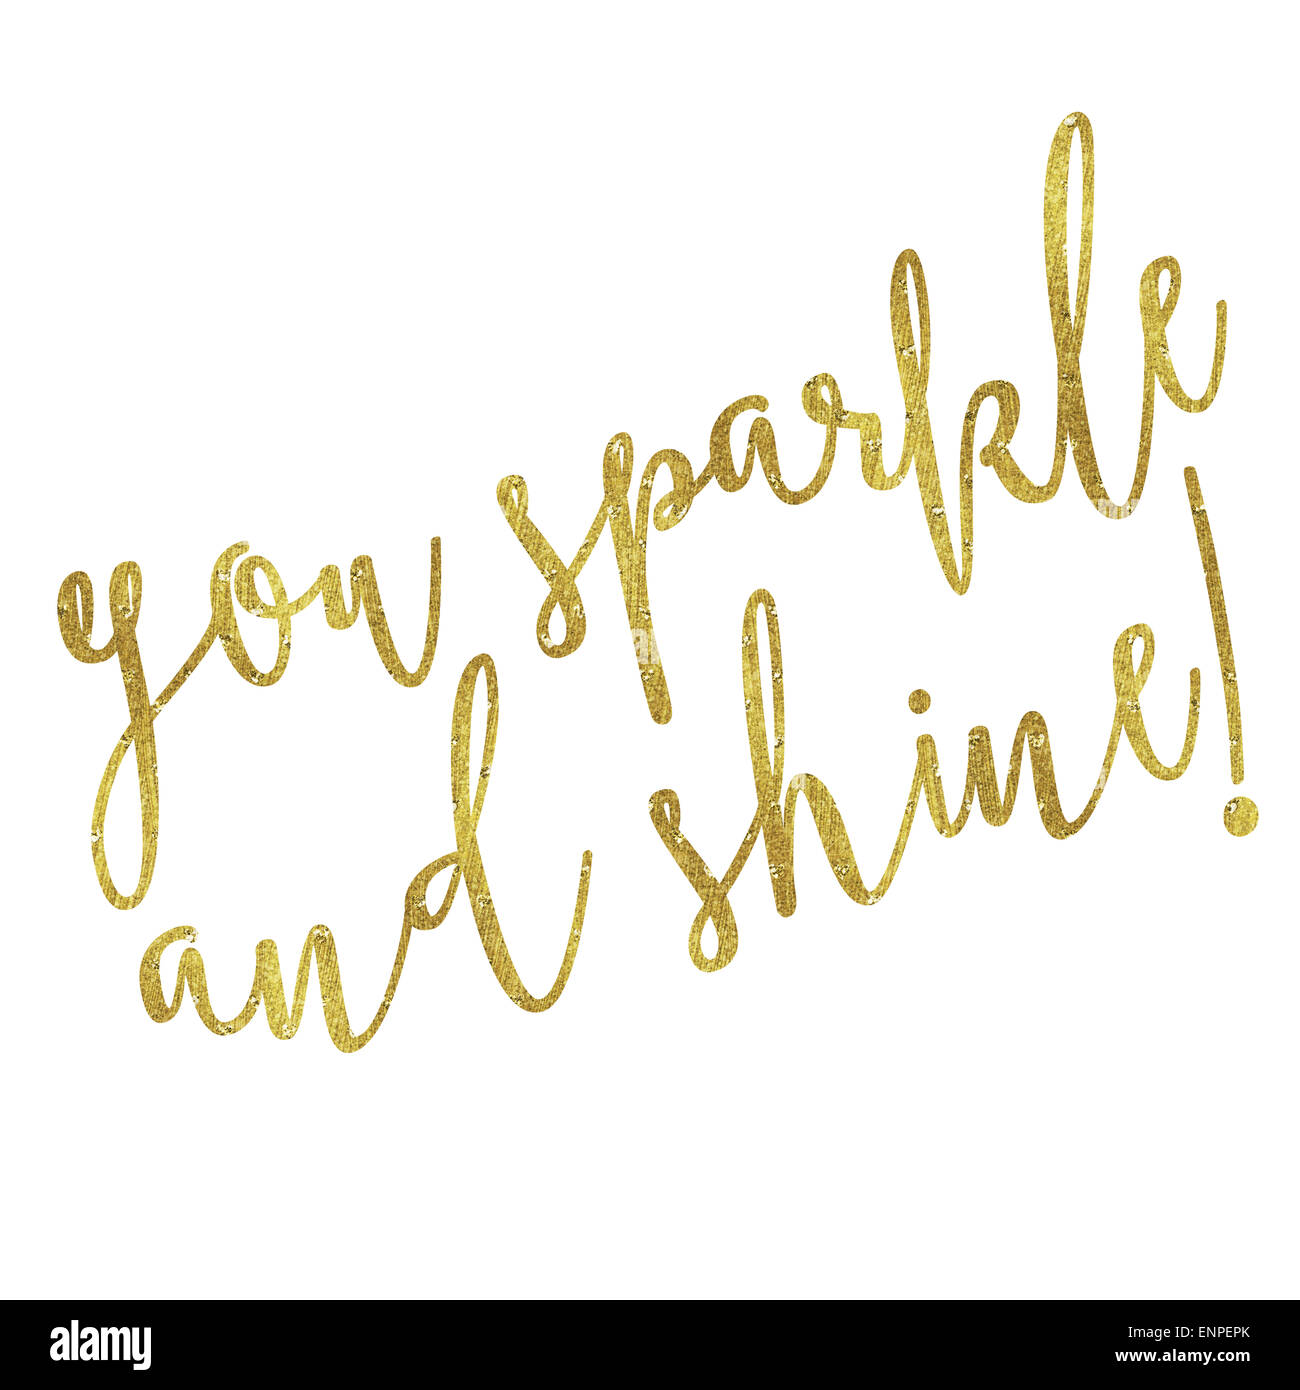 You Sparkle and Shine Gold Faux Foil Metallic Glitter Inspirational Quote Isolated on White Background Stock Photo